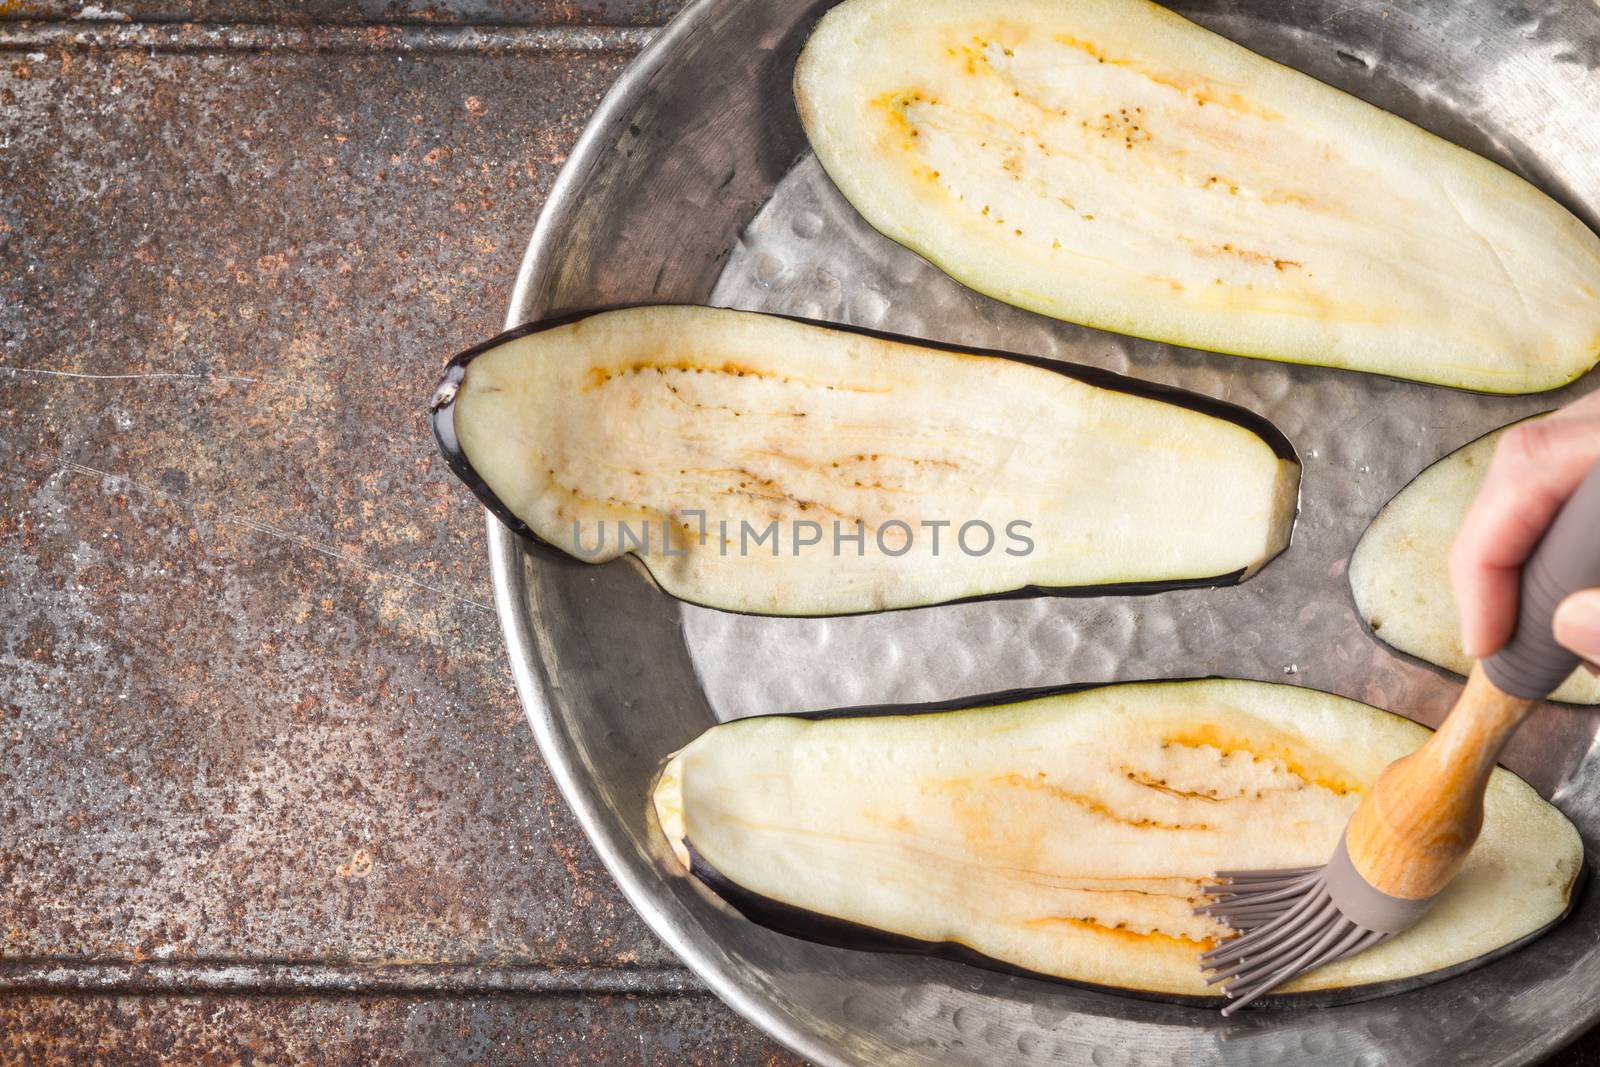 Brush the eggplant slices with olive oil top view